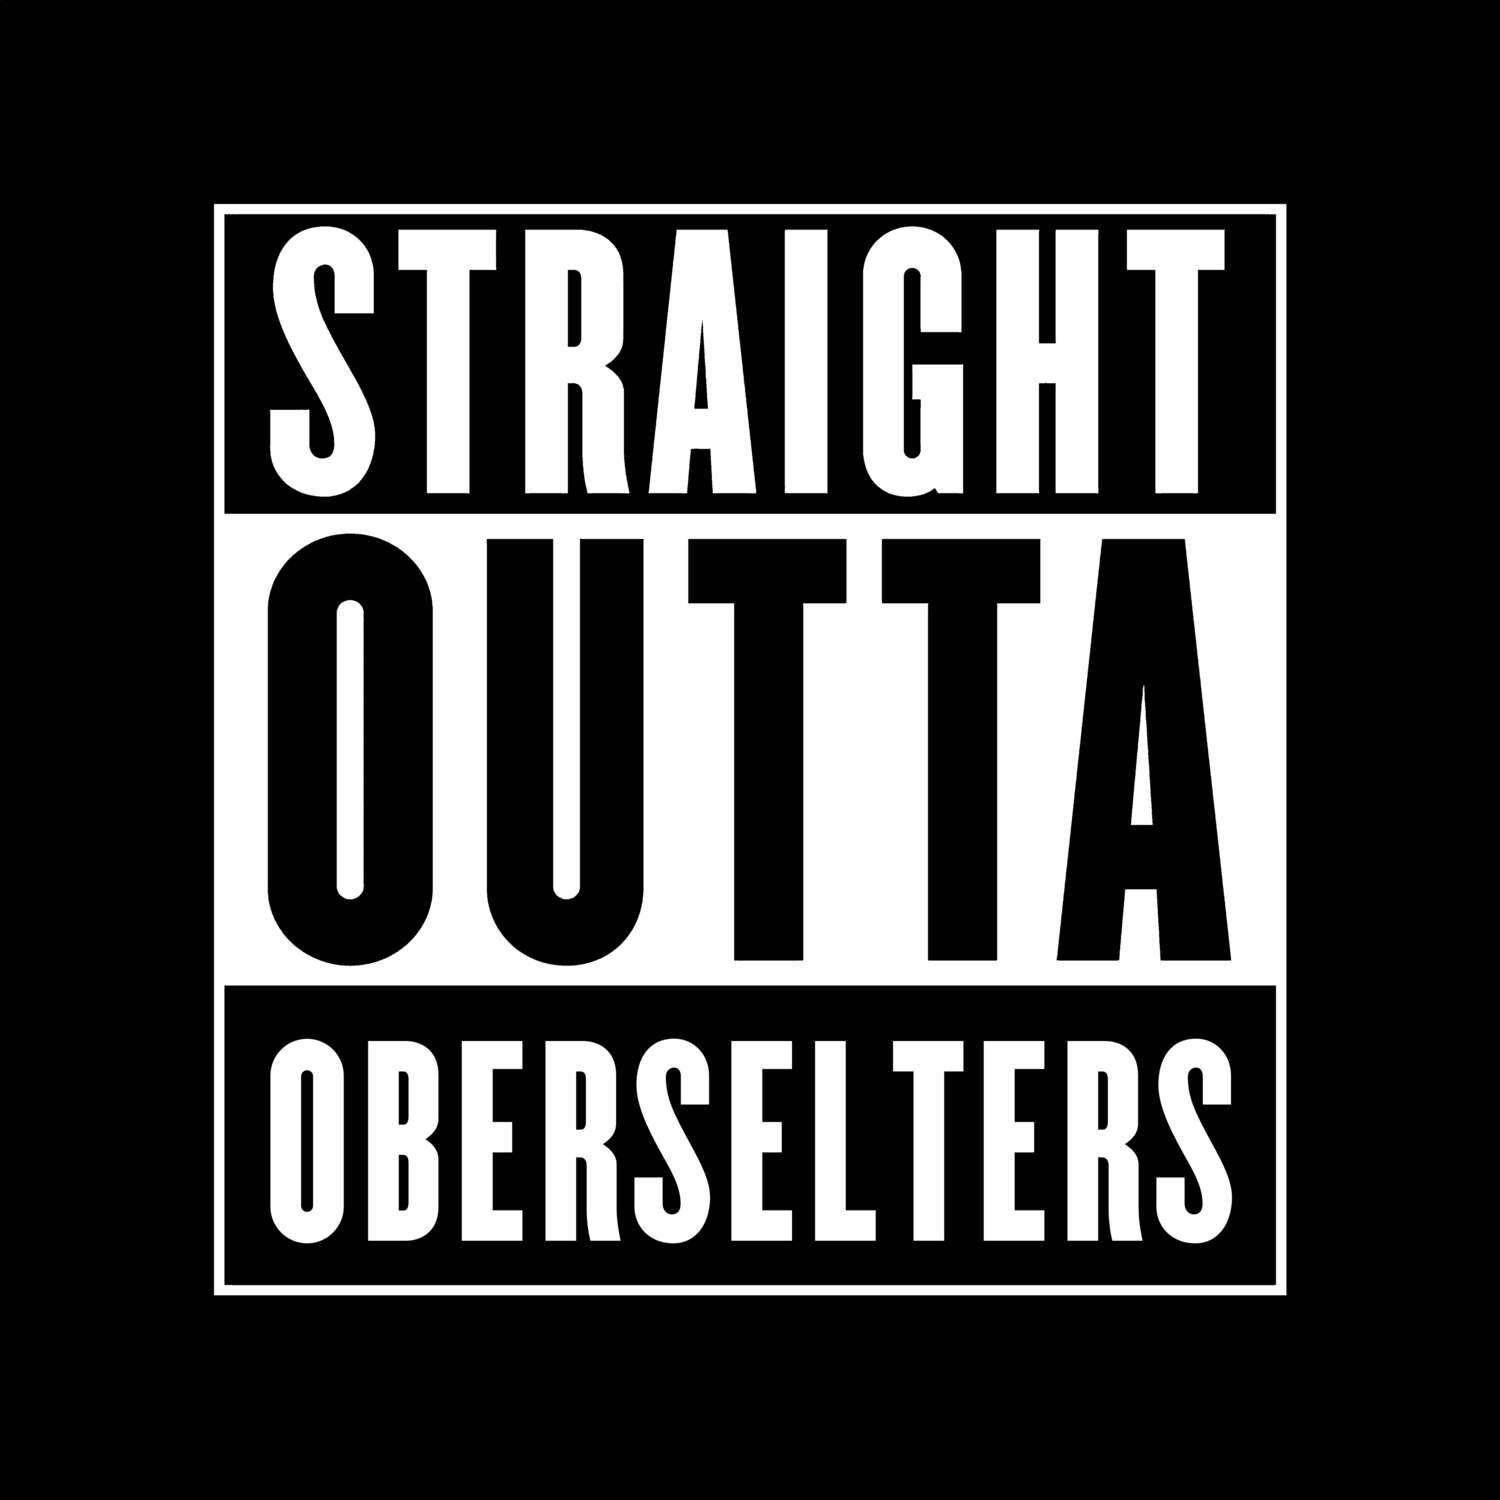 Oberselters T-Shirt »Straight Outta«